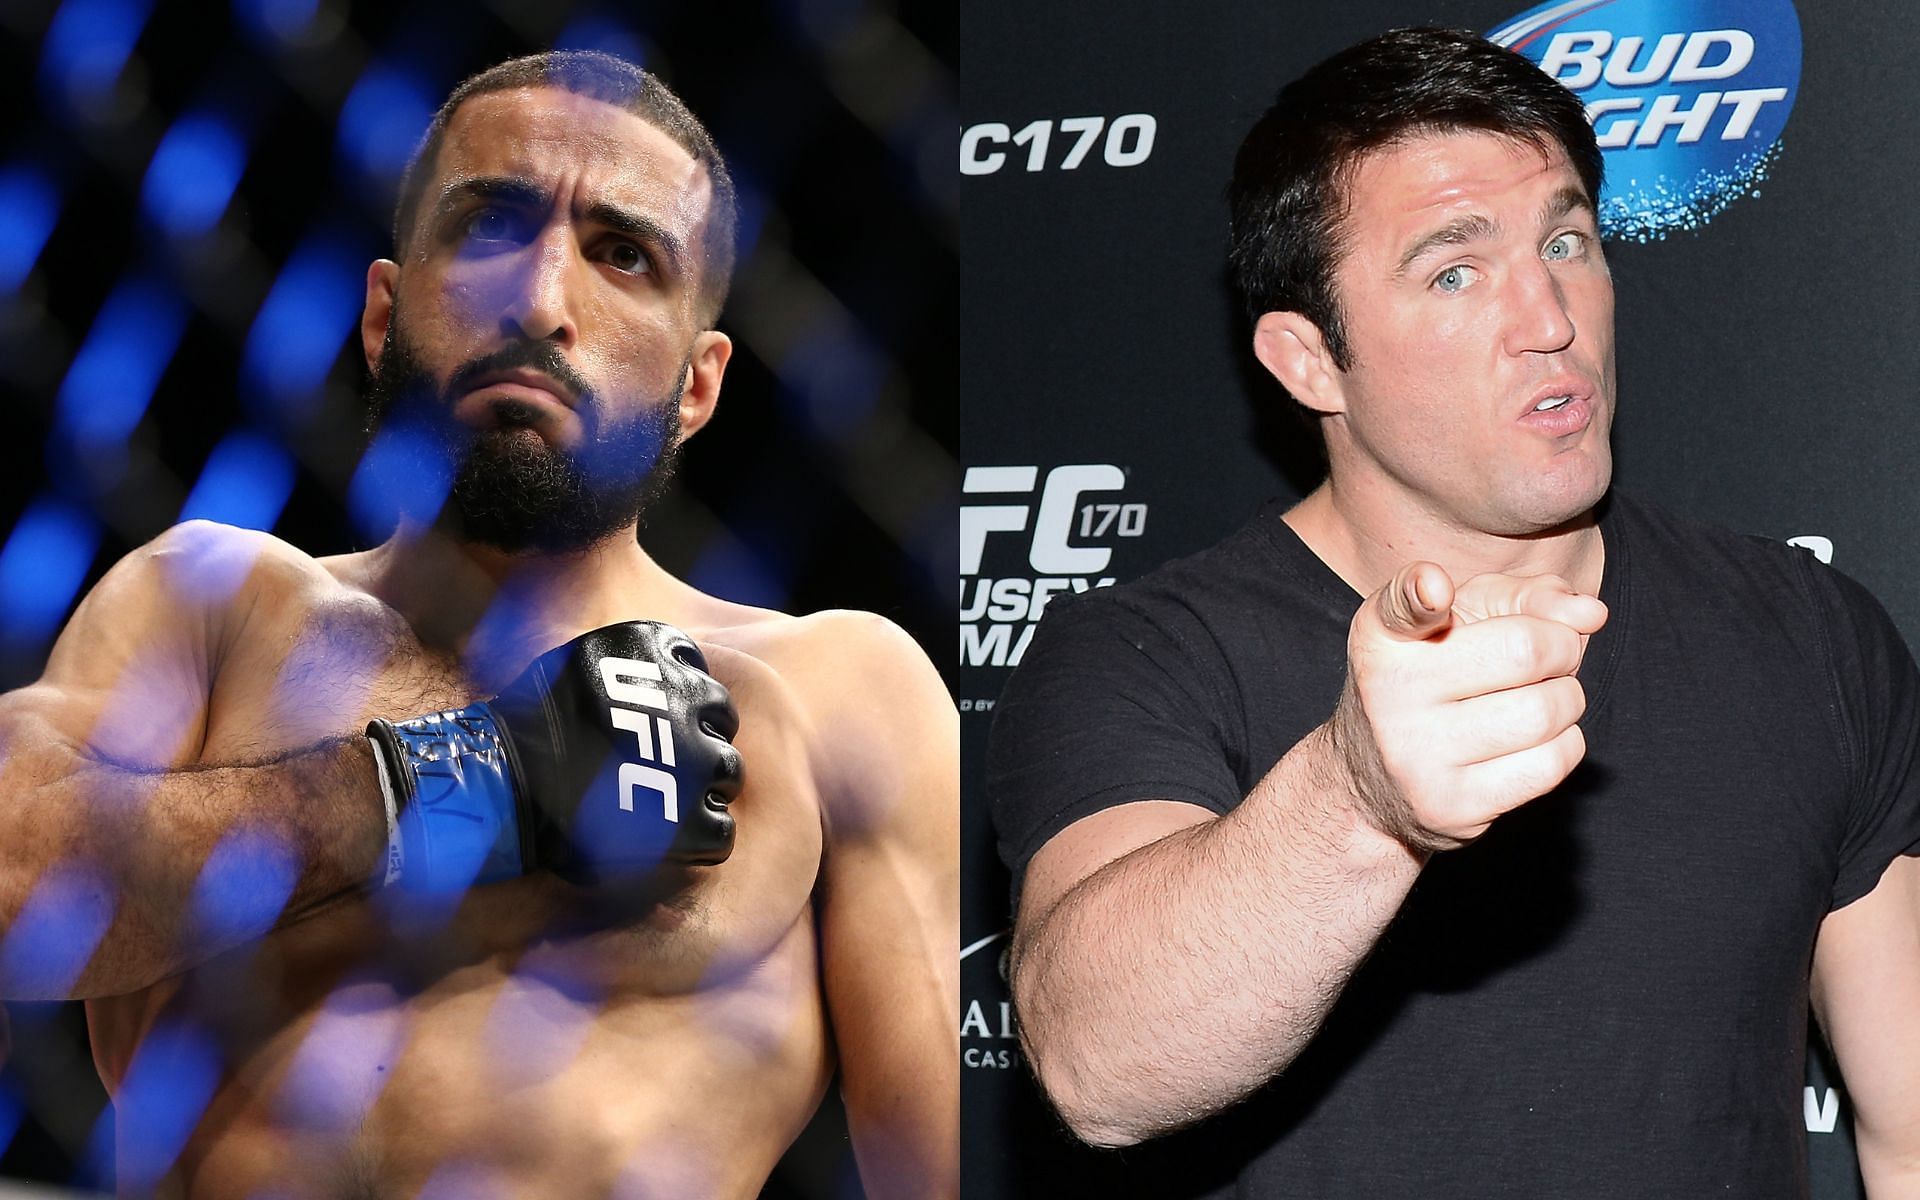 Belal Muhammad (Left) and Chael Sonnen (Right)